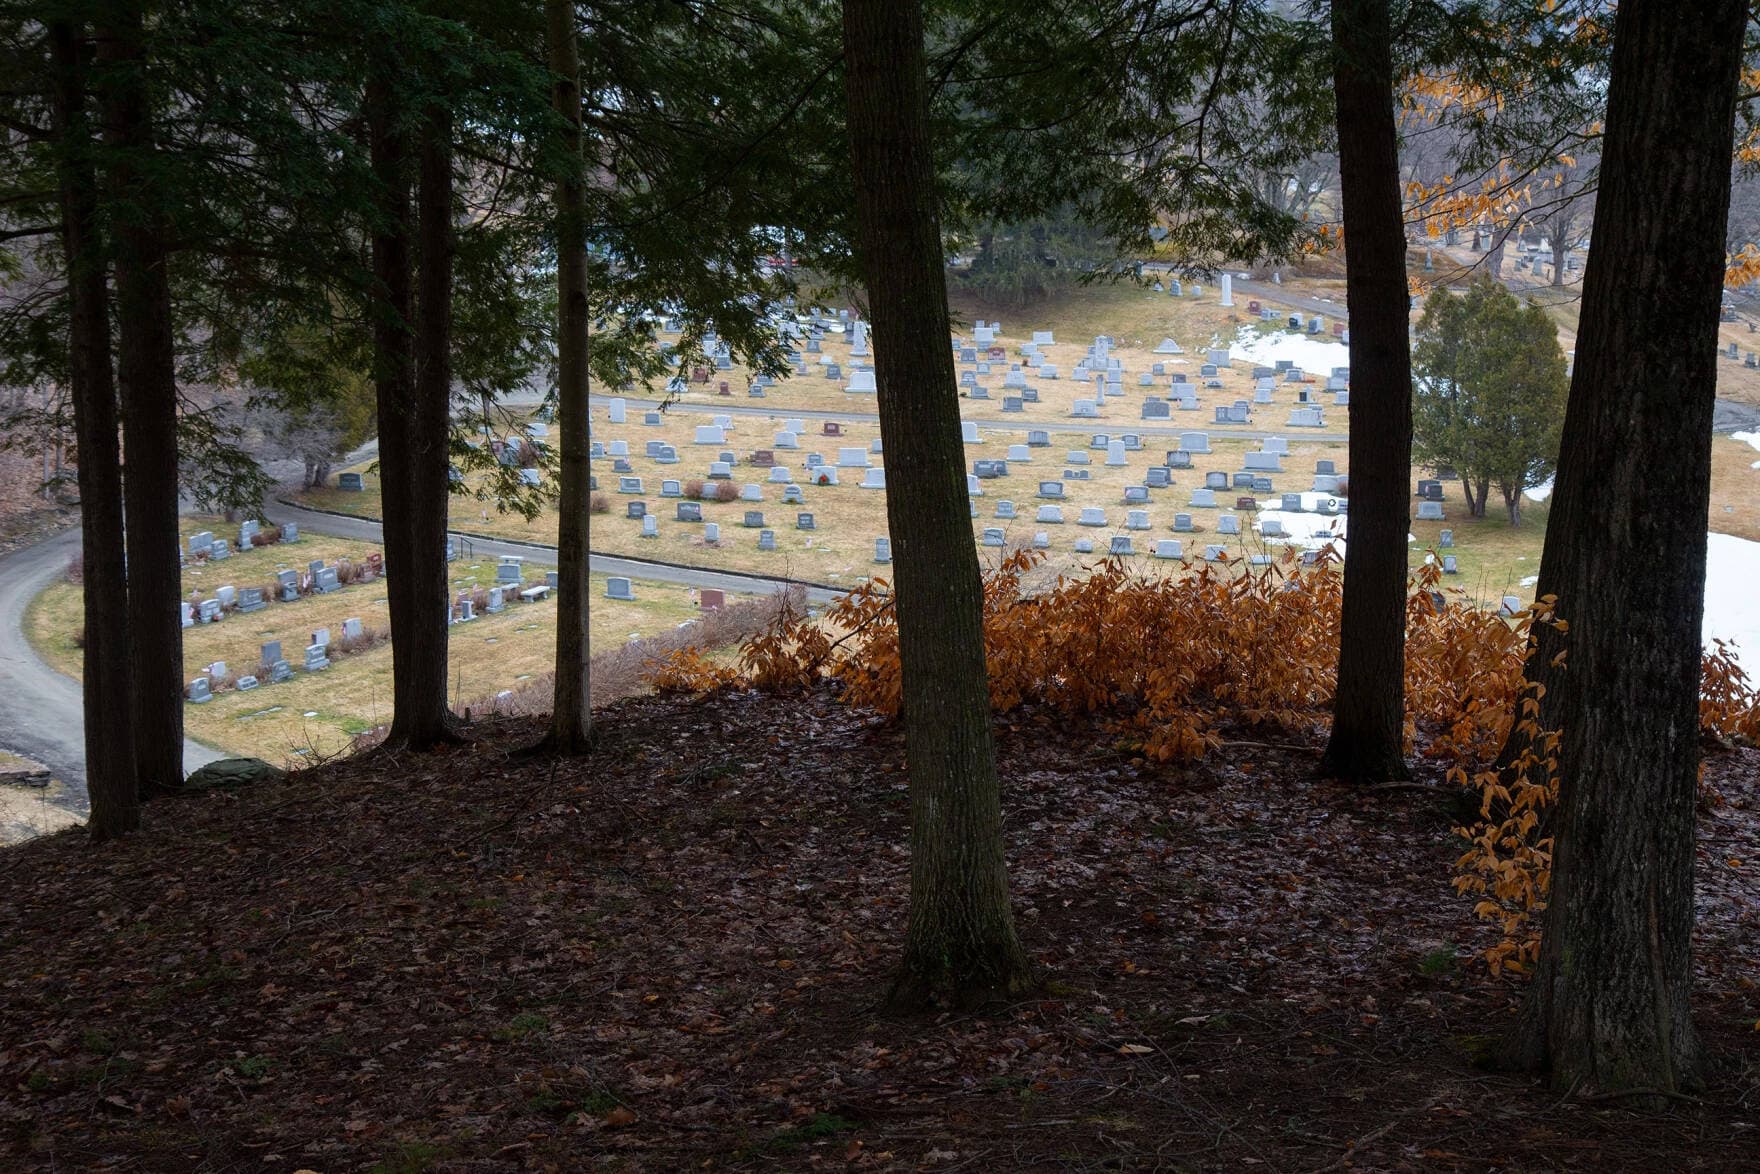 More than 70 cemeteries across New England have started offering natural burials in recent years, including Green Mount Cemetery in Montpelier. That’s where bodies can decompose underground, without the use of embalming fluids or concrete vaults. (Elodie Reed/Vermont Public)